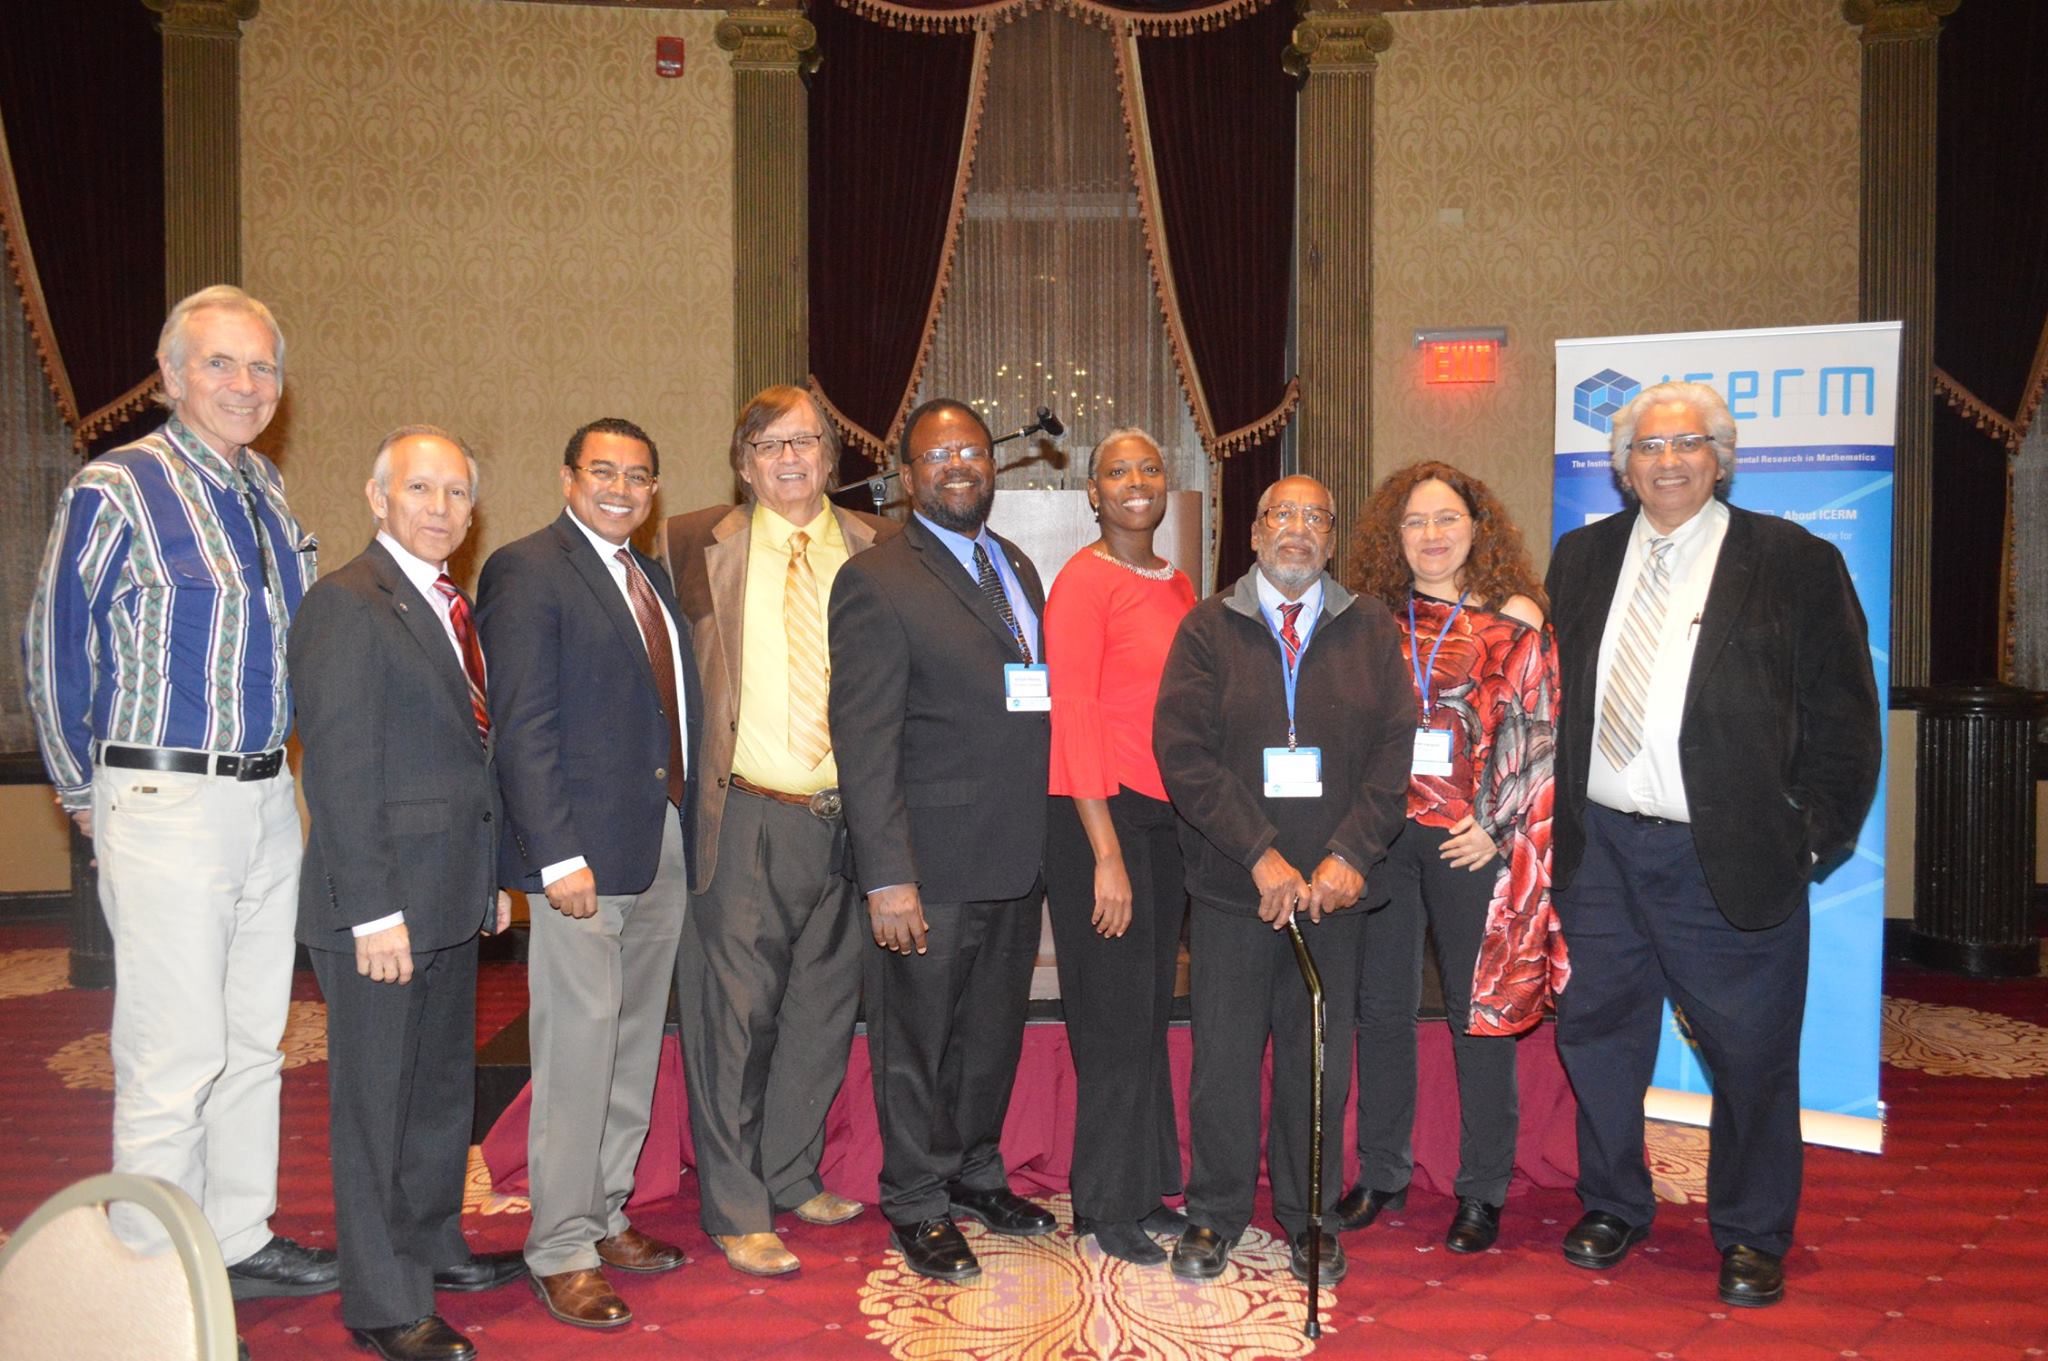 Dr. Ronald E. Mickens (3rd from right) surrounded by some past Blackwell-Tapia prize recipients, friends, and Dr. Richard Tapia (4th from left)